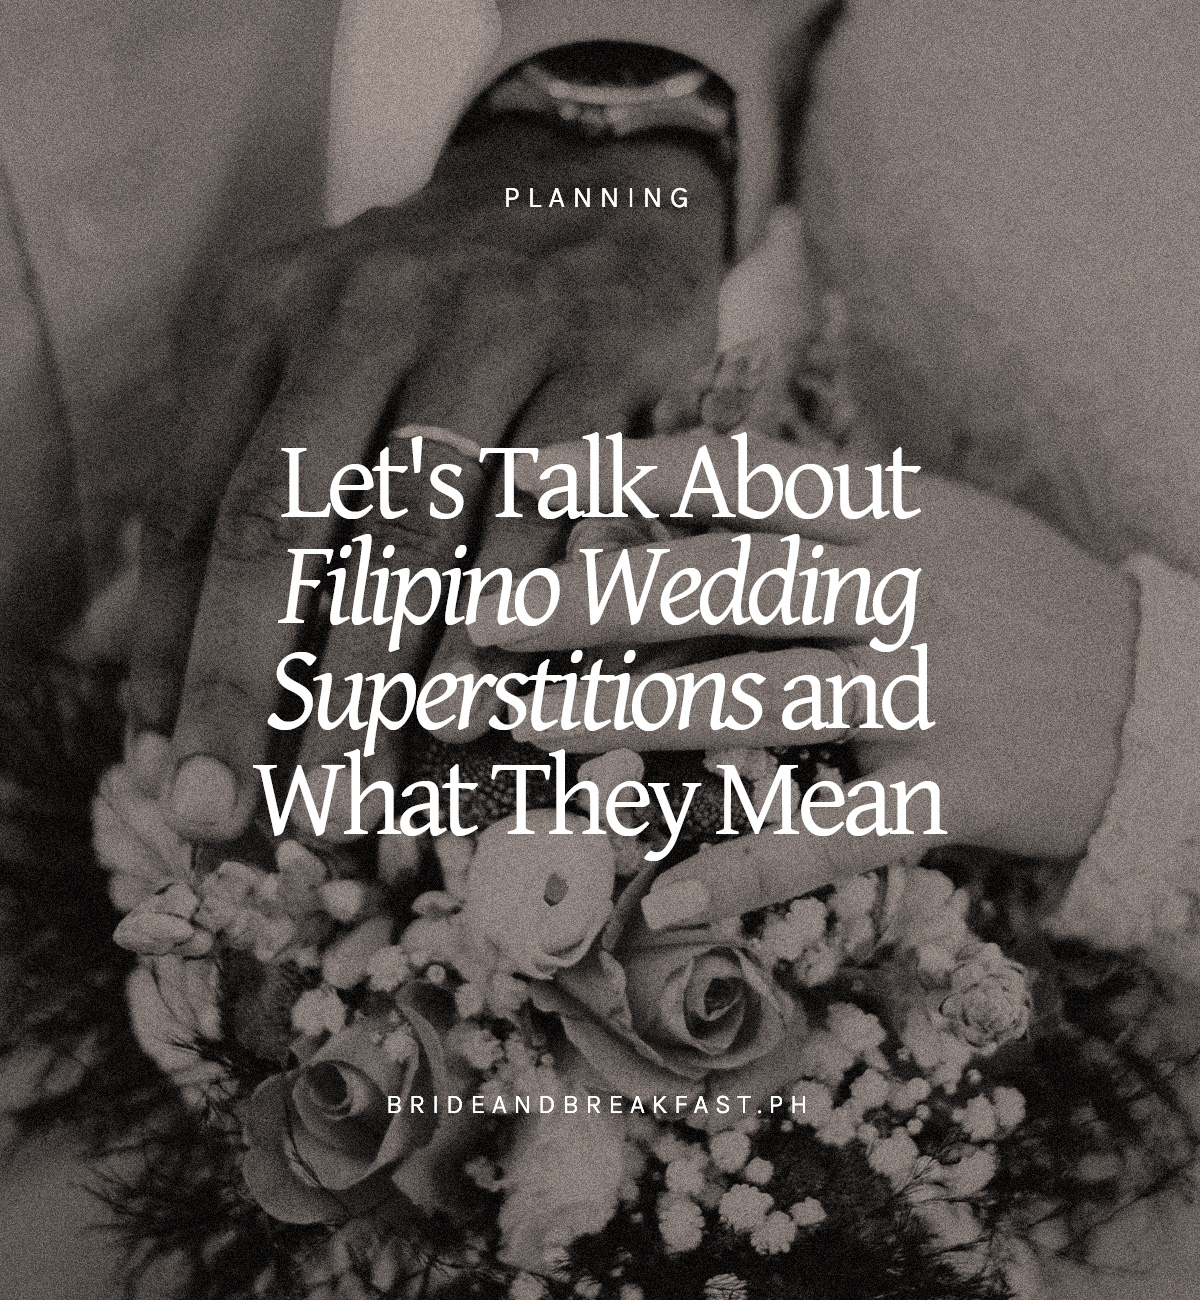 Let's Talk About Filipino Wedding Superstitions and What They Mean